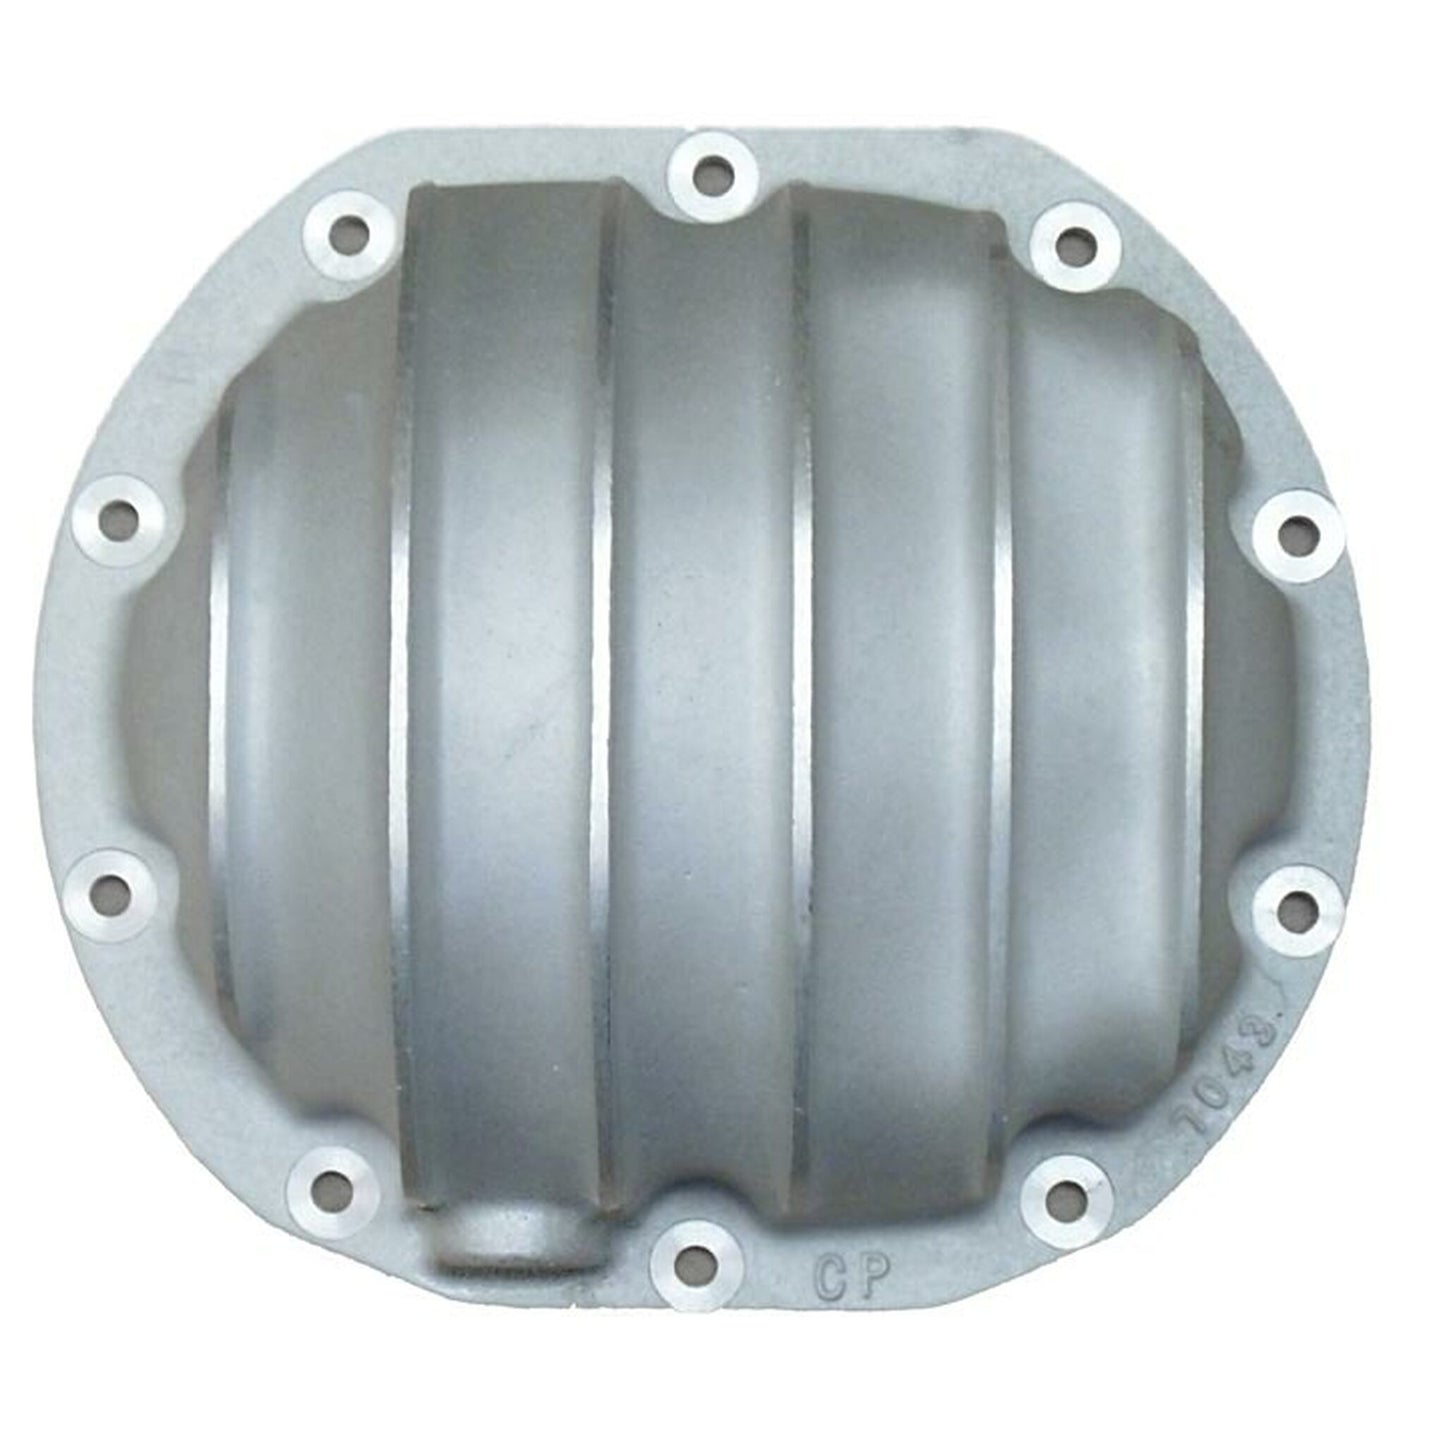 Ford 7.5" Differential Cover 4.375" Depth